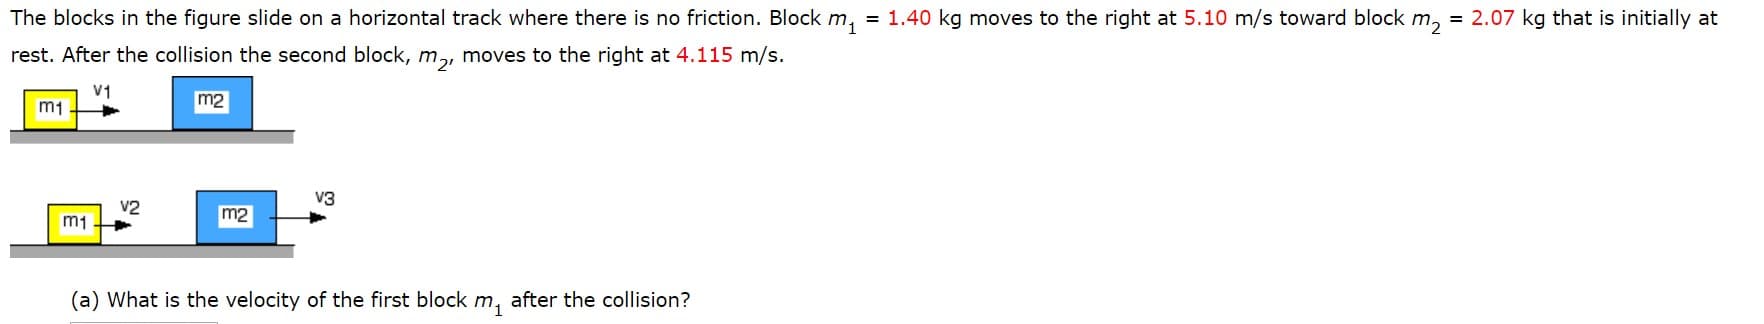 = 1.40 kg moves to the right at 5.10 m/s toward block m, = 2.07 kg that is initially at
The blocks in the figure slide on a horizontal track where there is no friction. Block m,
rest. After the collision the second block, m.,, moves to the right at 4.115 m/s.
V1
m2
m1
V3
v2
m2
m1
(a) What is the velocity of the first block m, after the collision?
